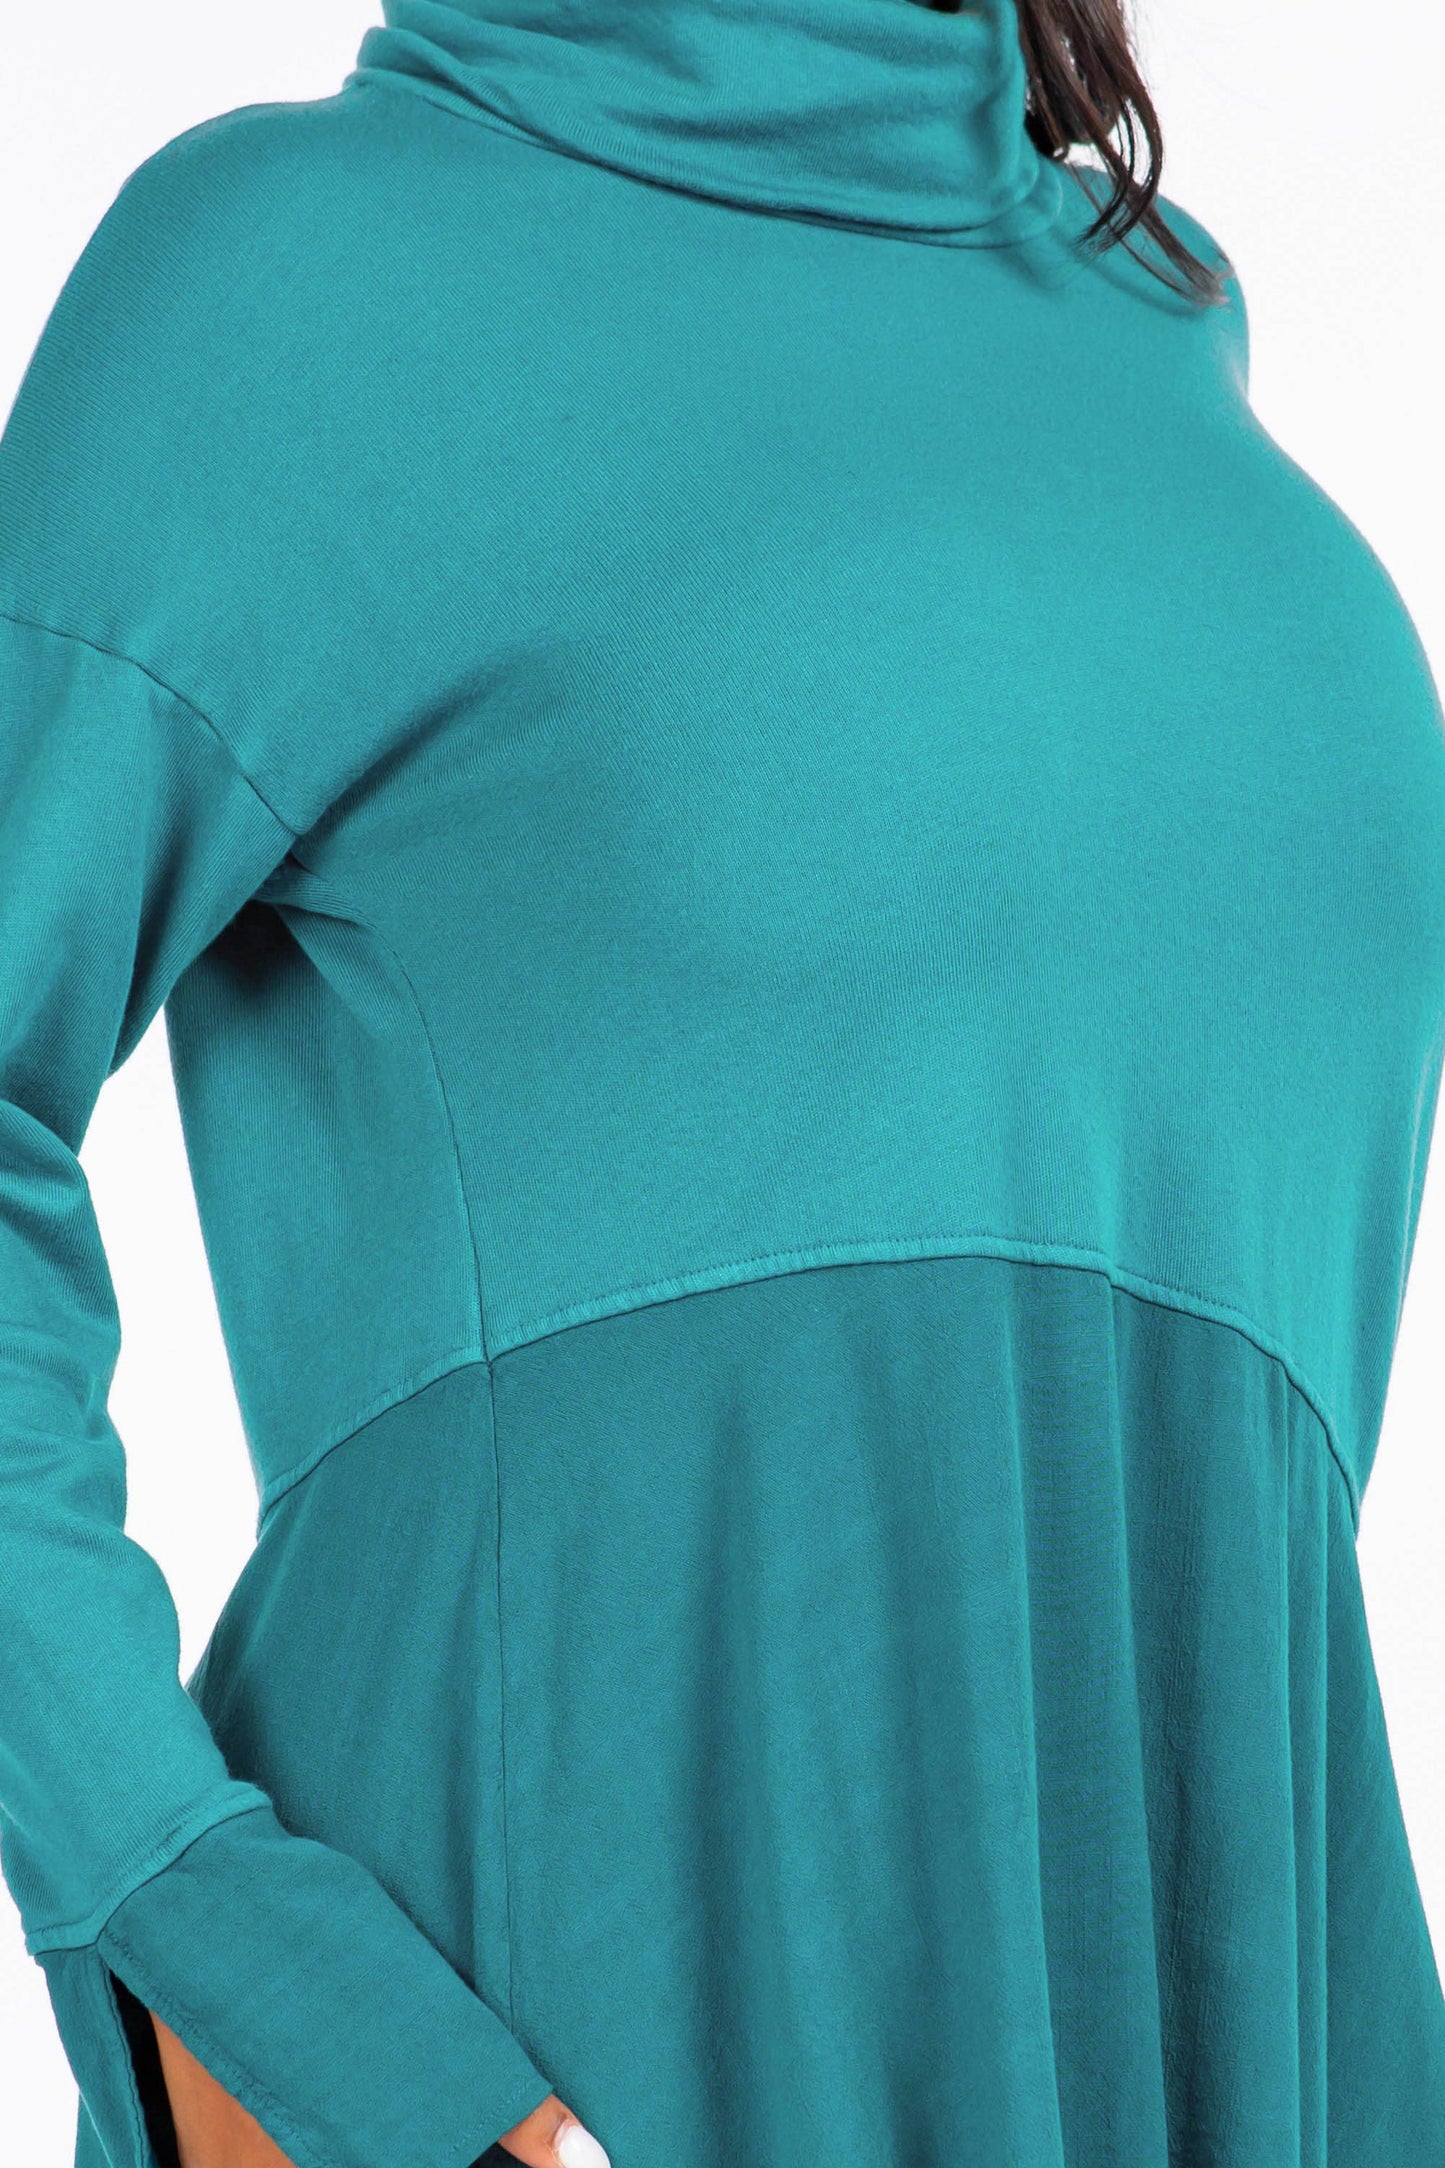 Cowl Neck Tunic with Asymmetric Panel